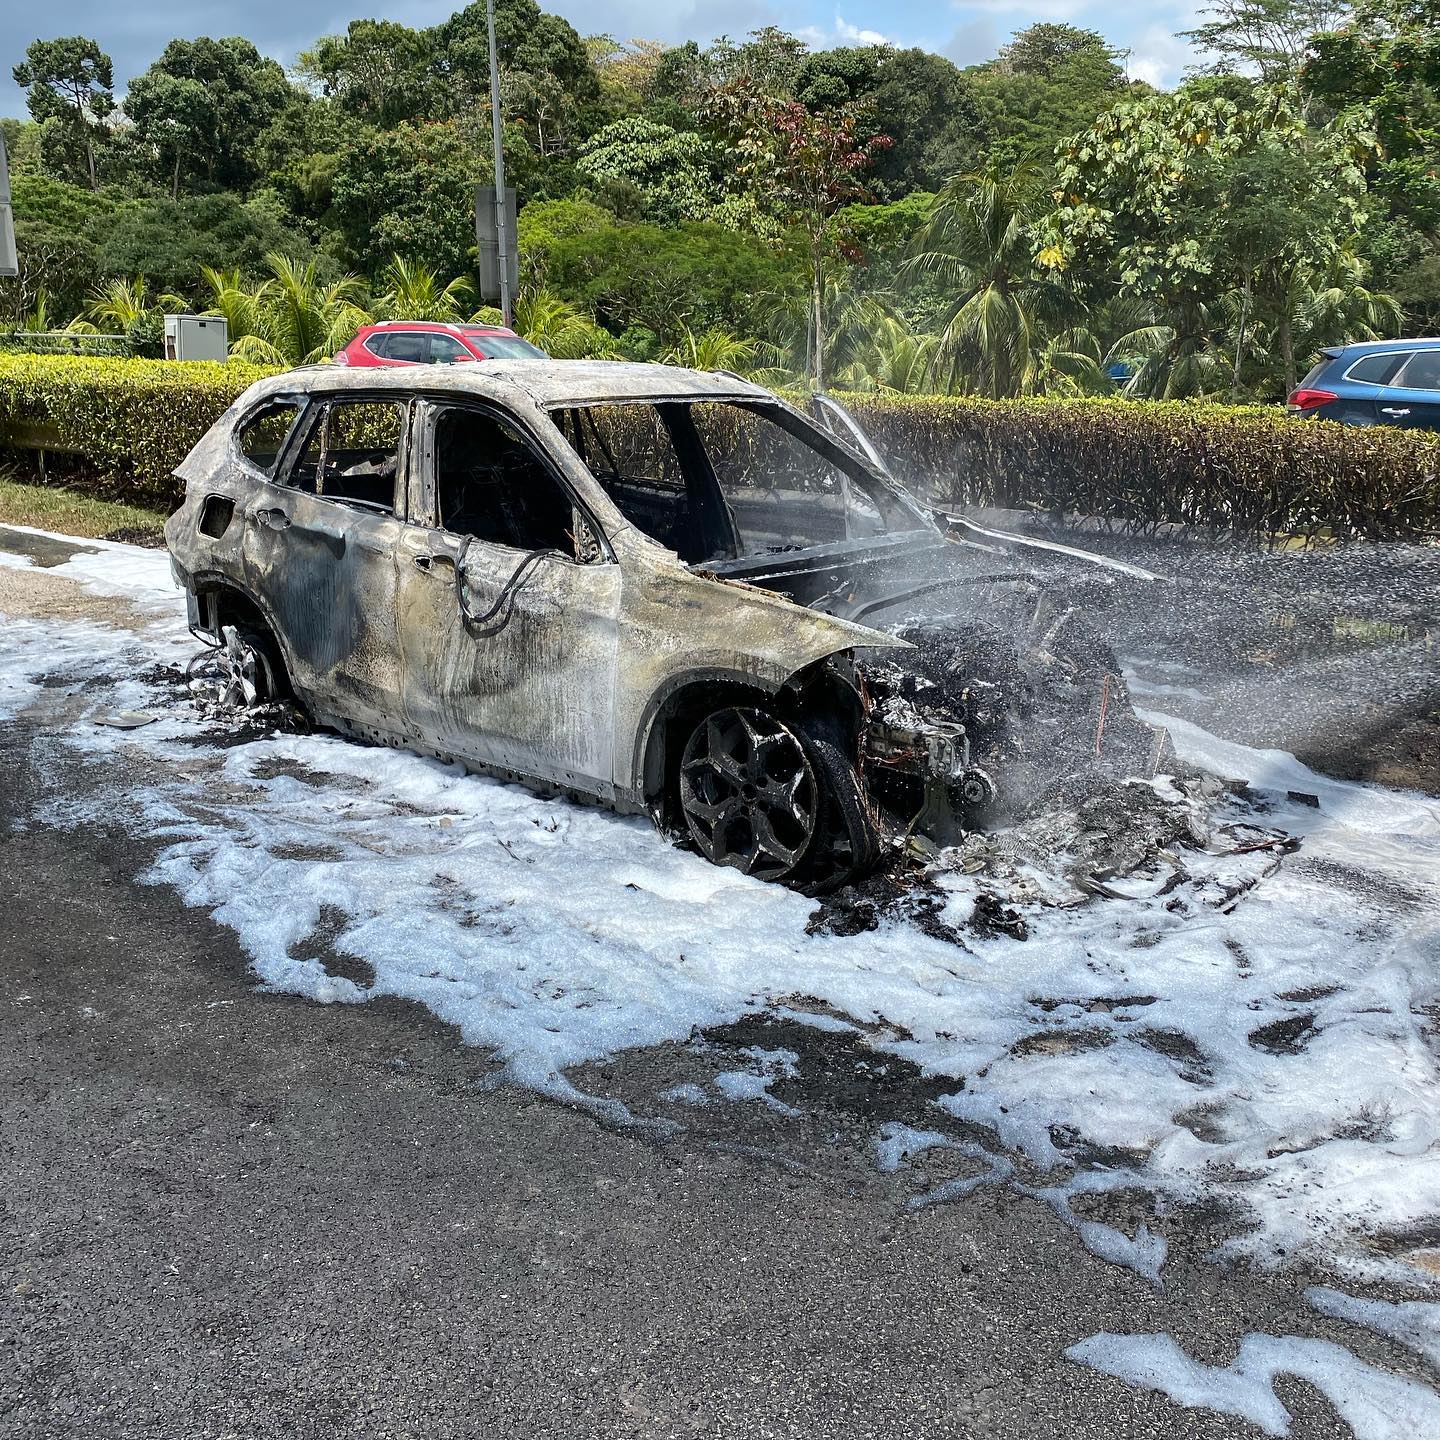 Image of Cher's burnt BMW